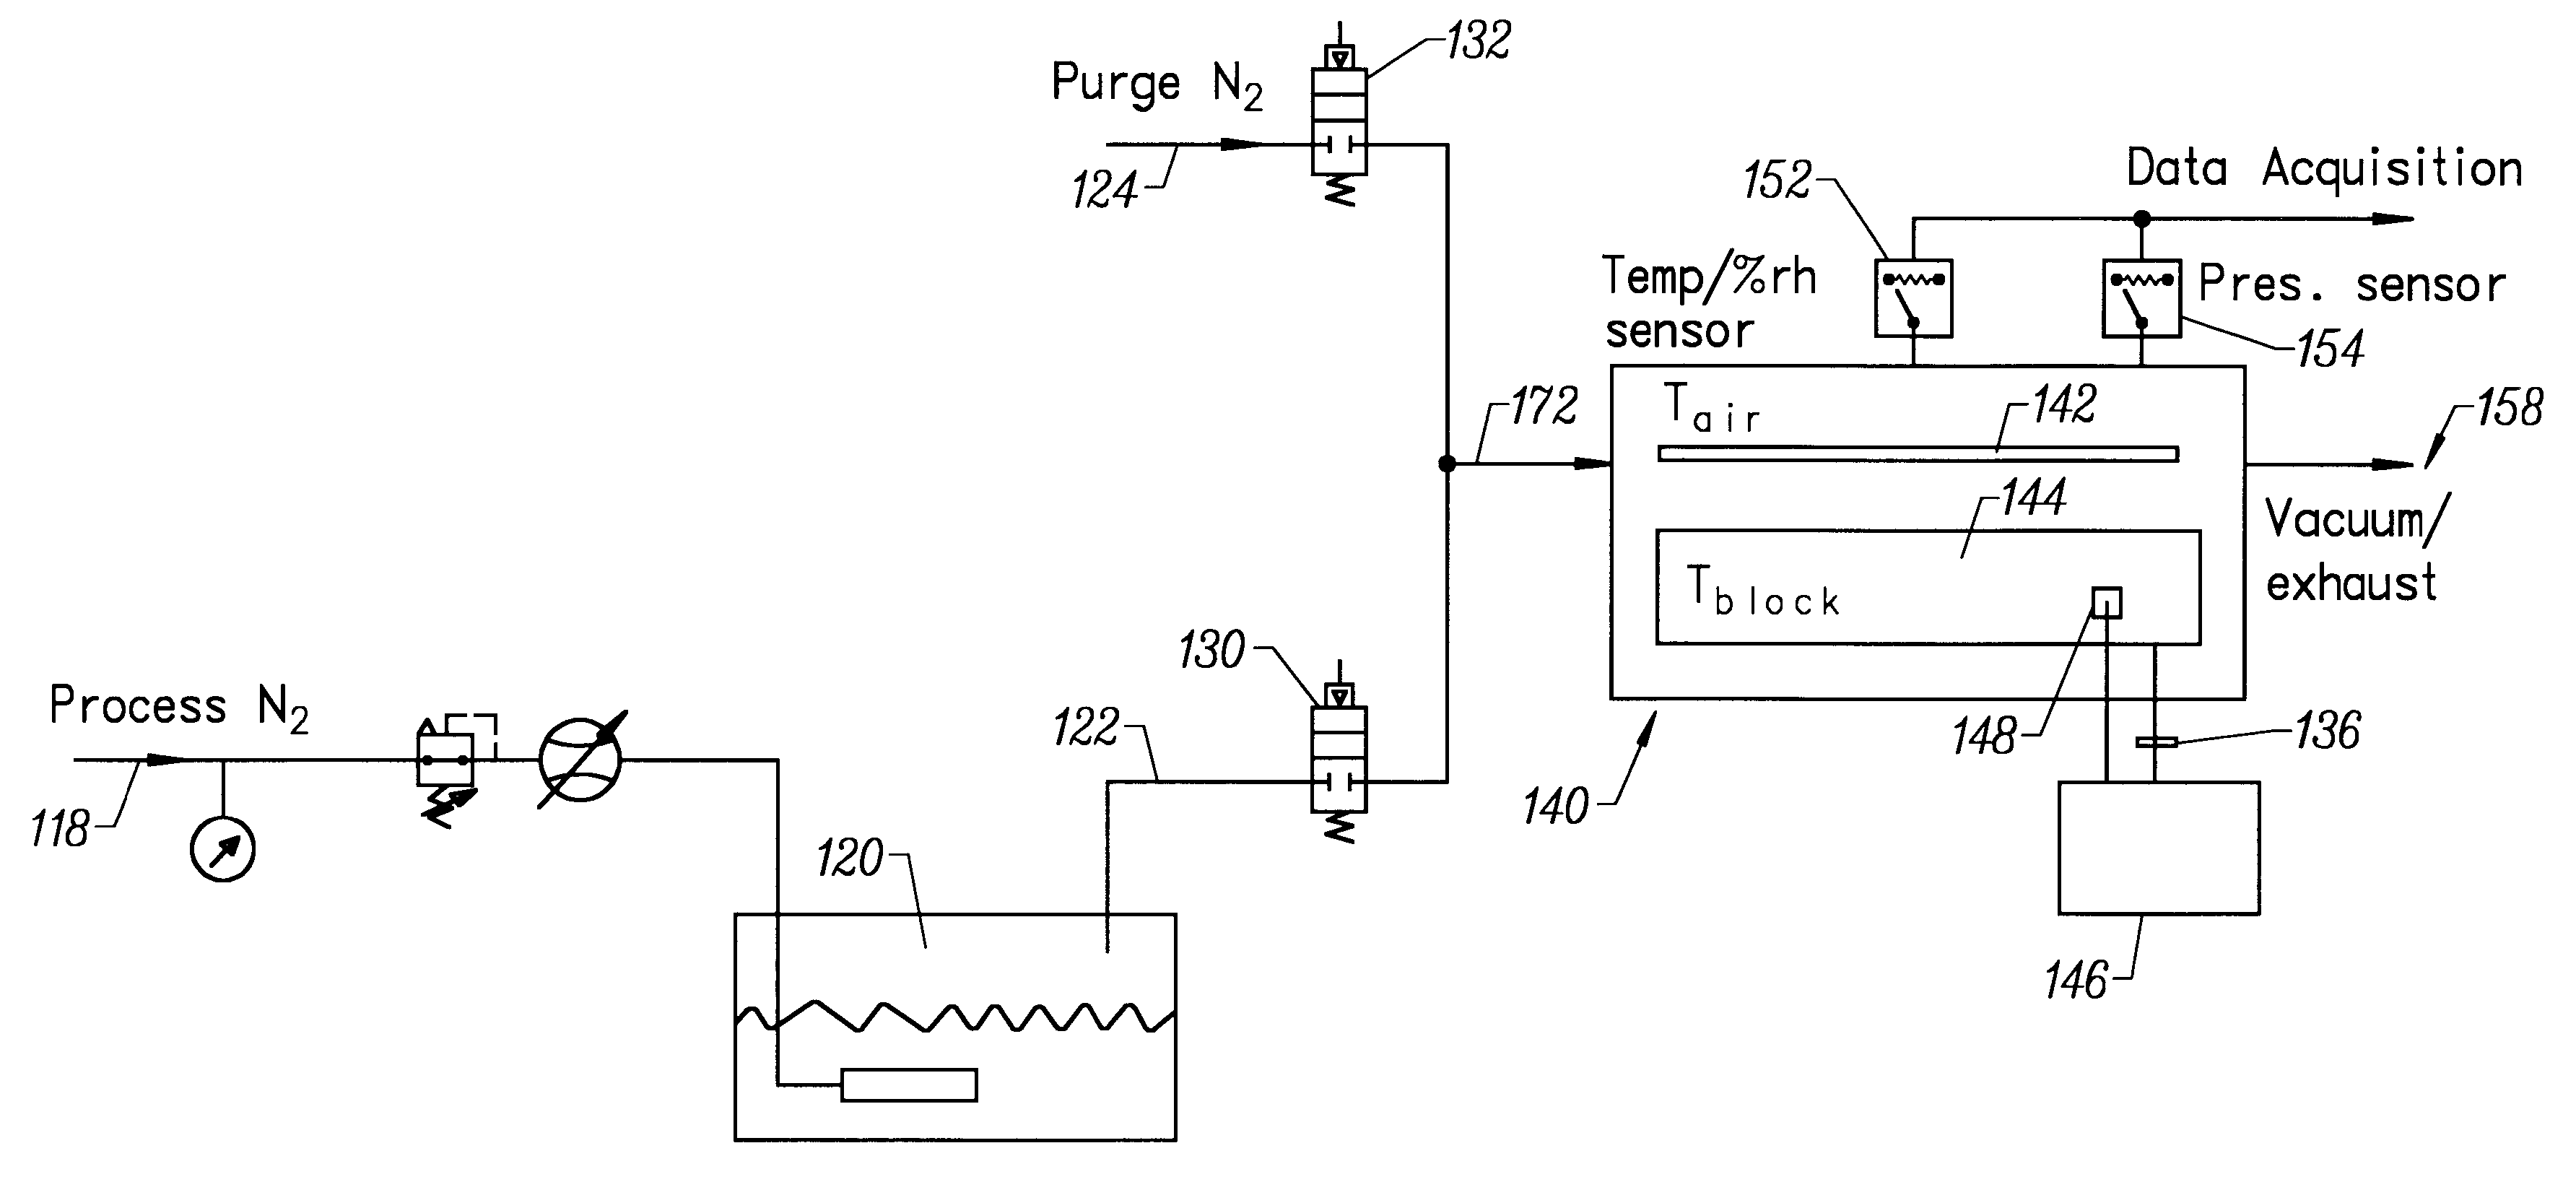 Environment exchange control for material on a wafer surface